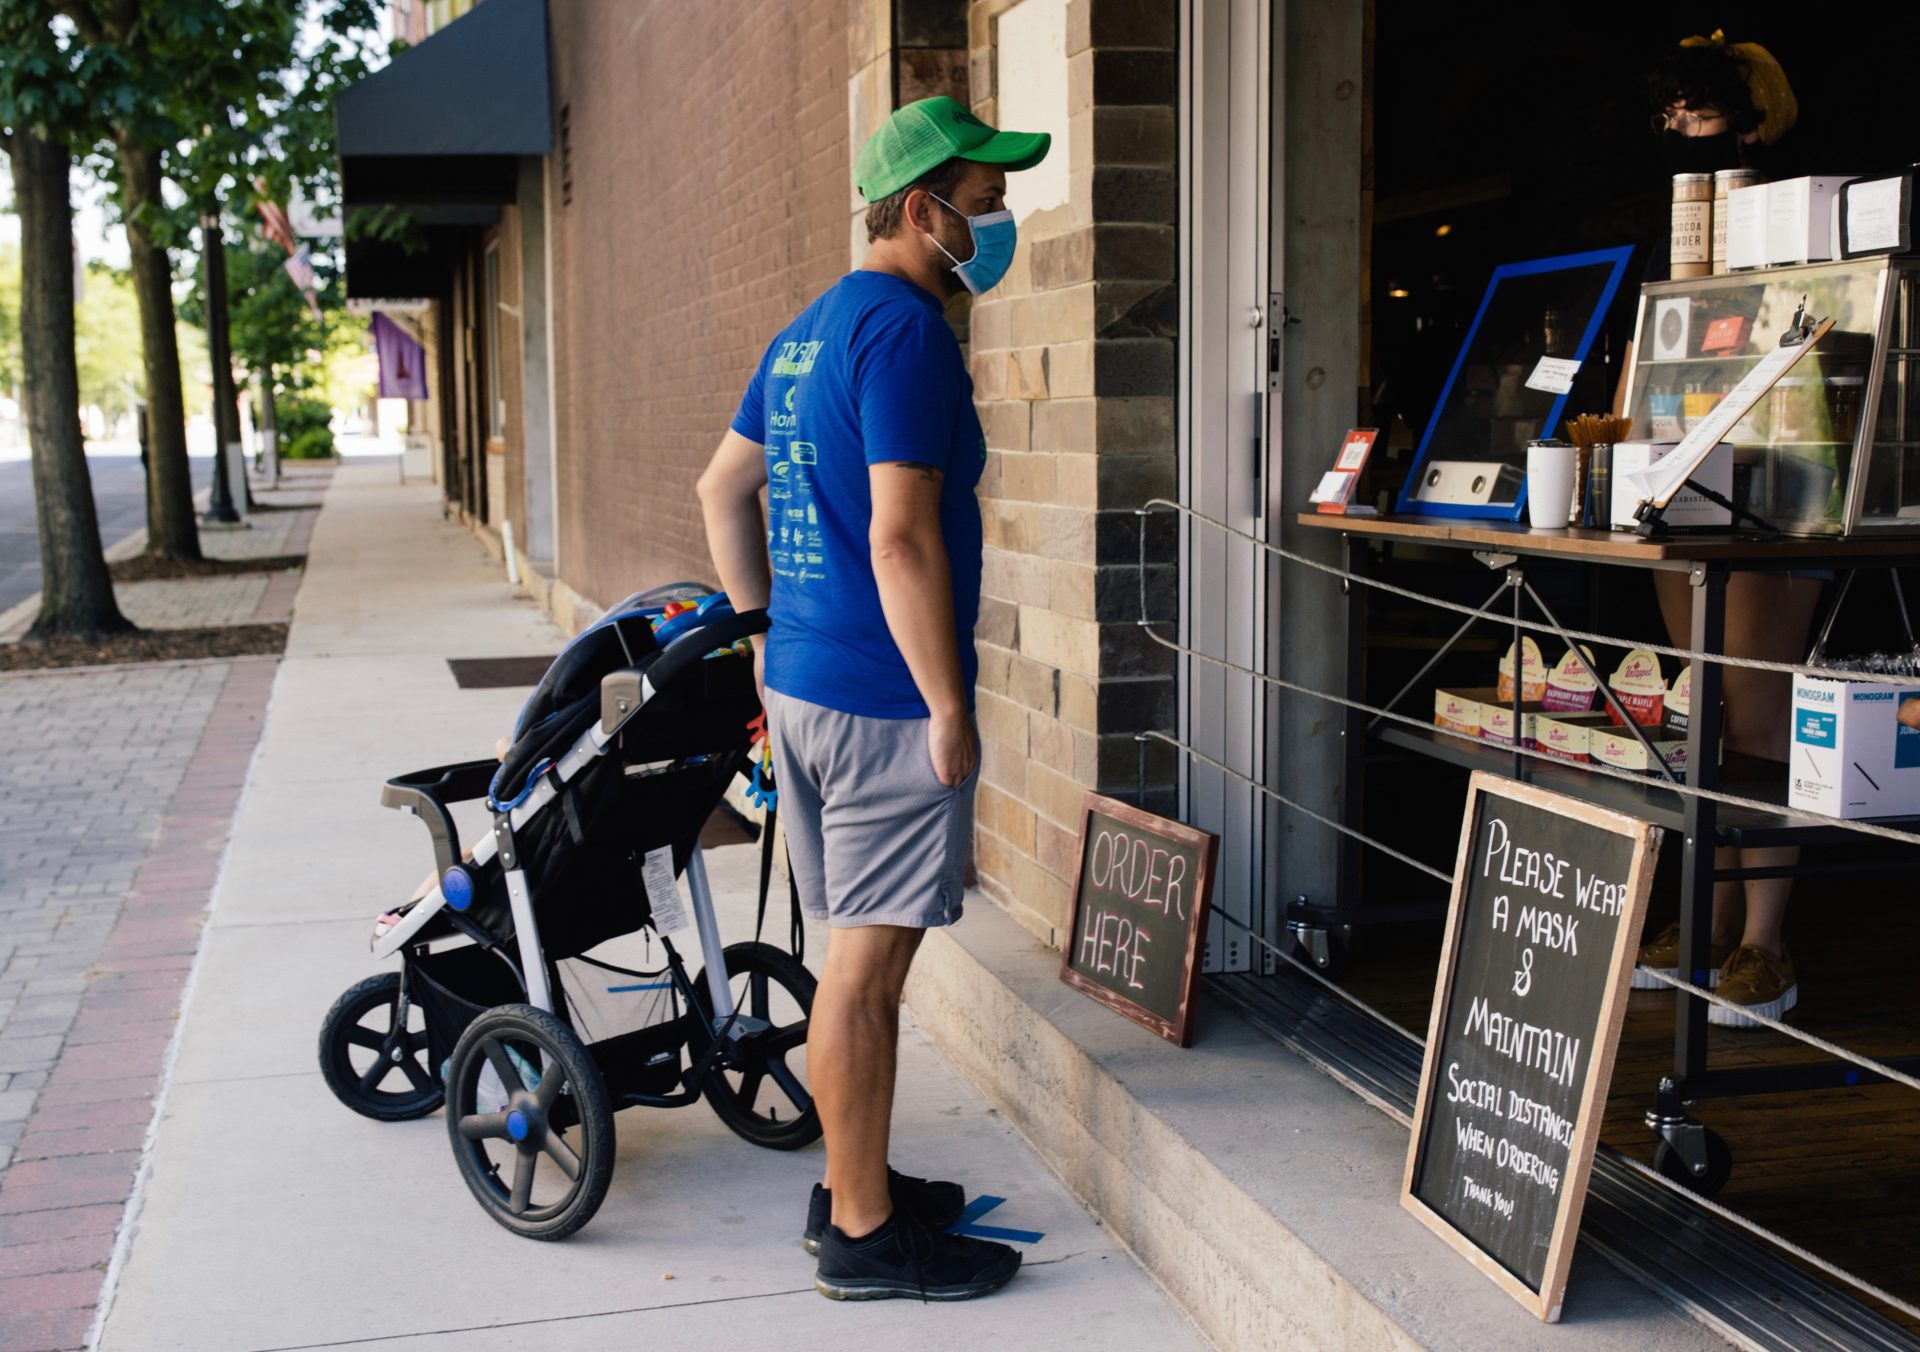 A customer places an order from the sidewalk at Alabaster Coffee Roaster & Tea Company in Williamsport on July 19, 2020.